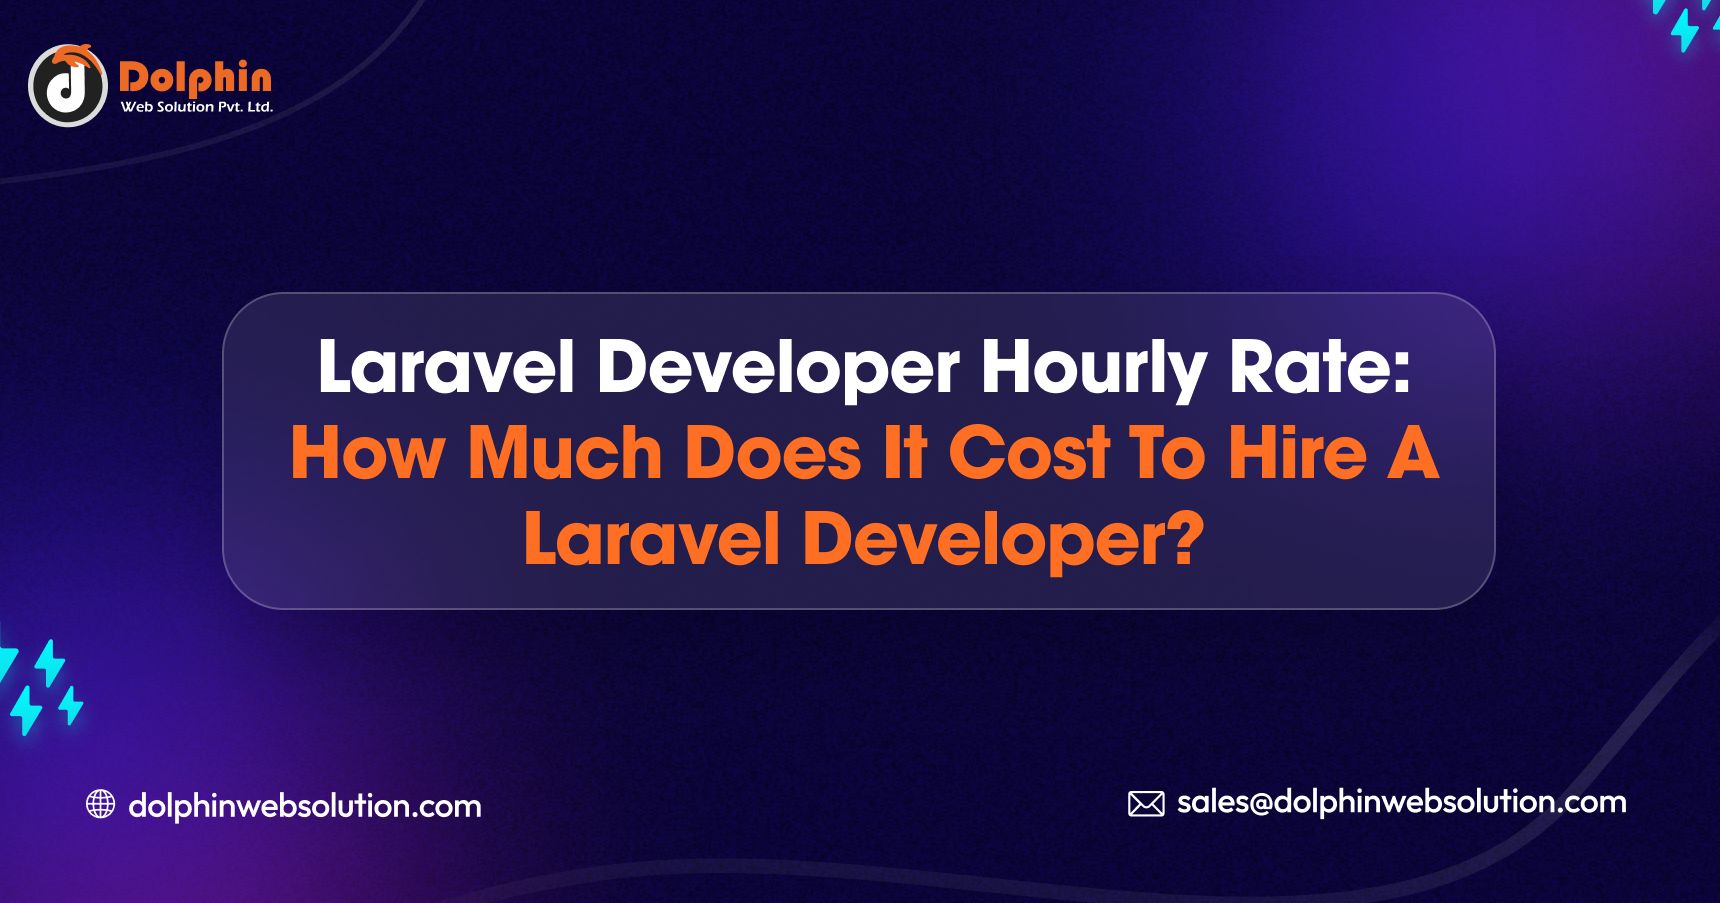 How Much Does It Cost To Hire A Laravel Developer?